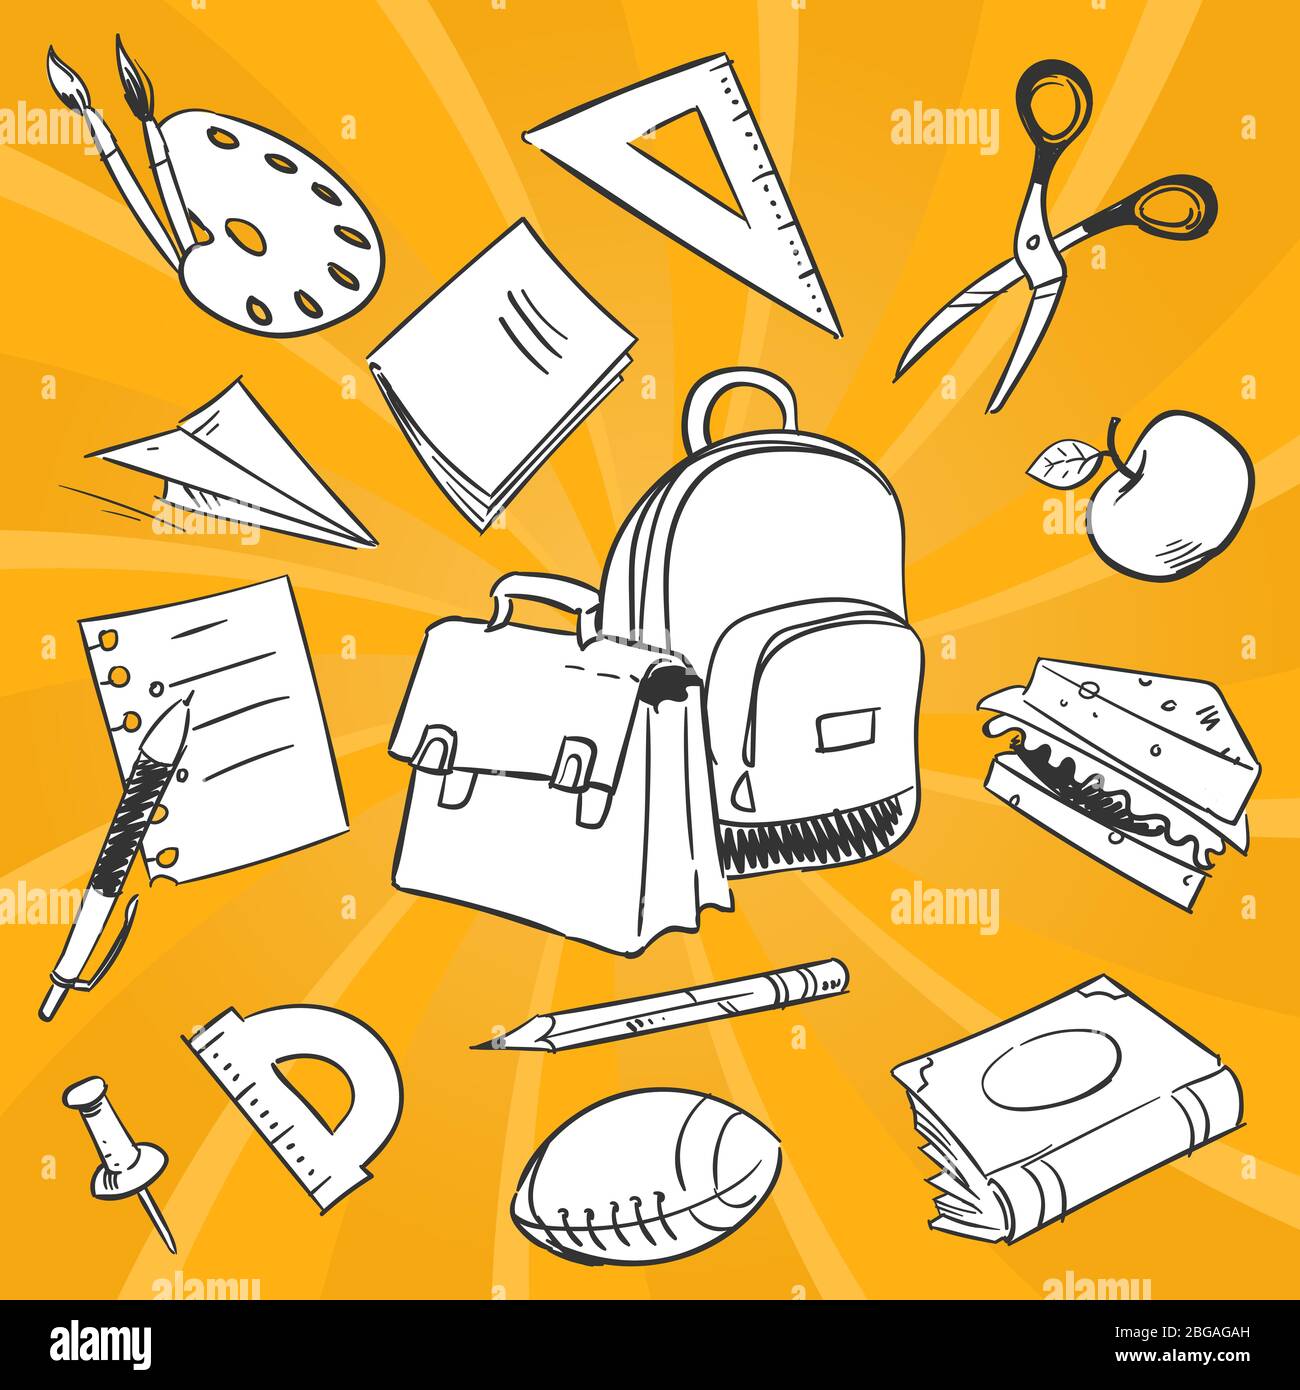 Necessary students things - hand drawn stationery, school bags, food on colorful backdrop. School drawing stationery tools for education. Vector illustration Stock Vector